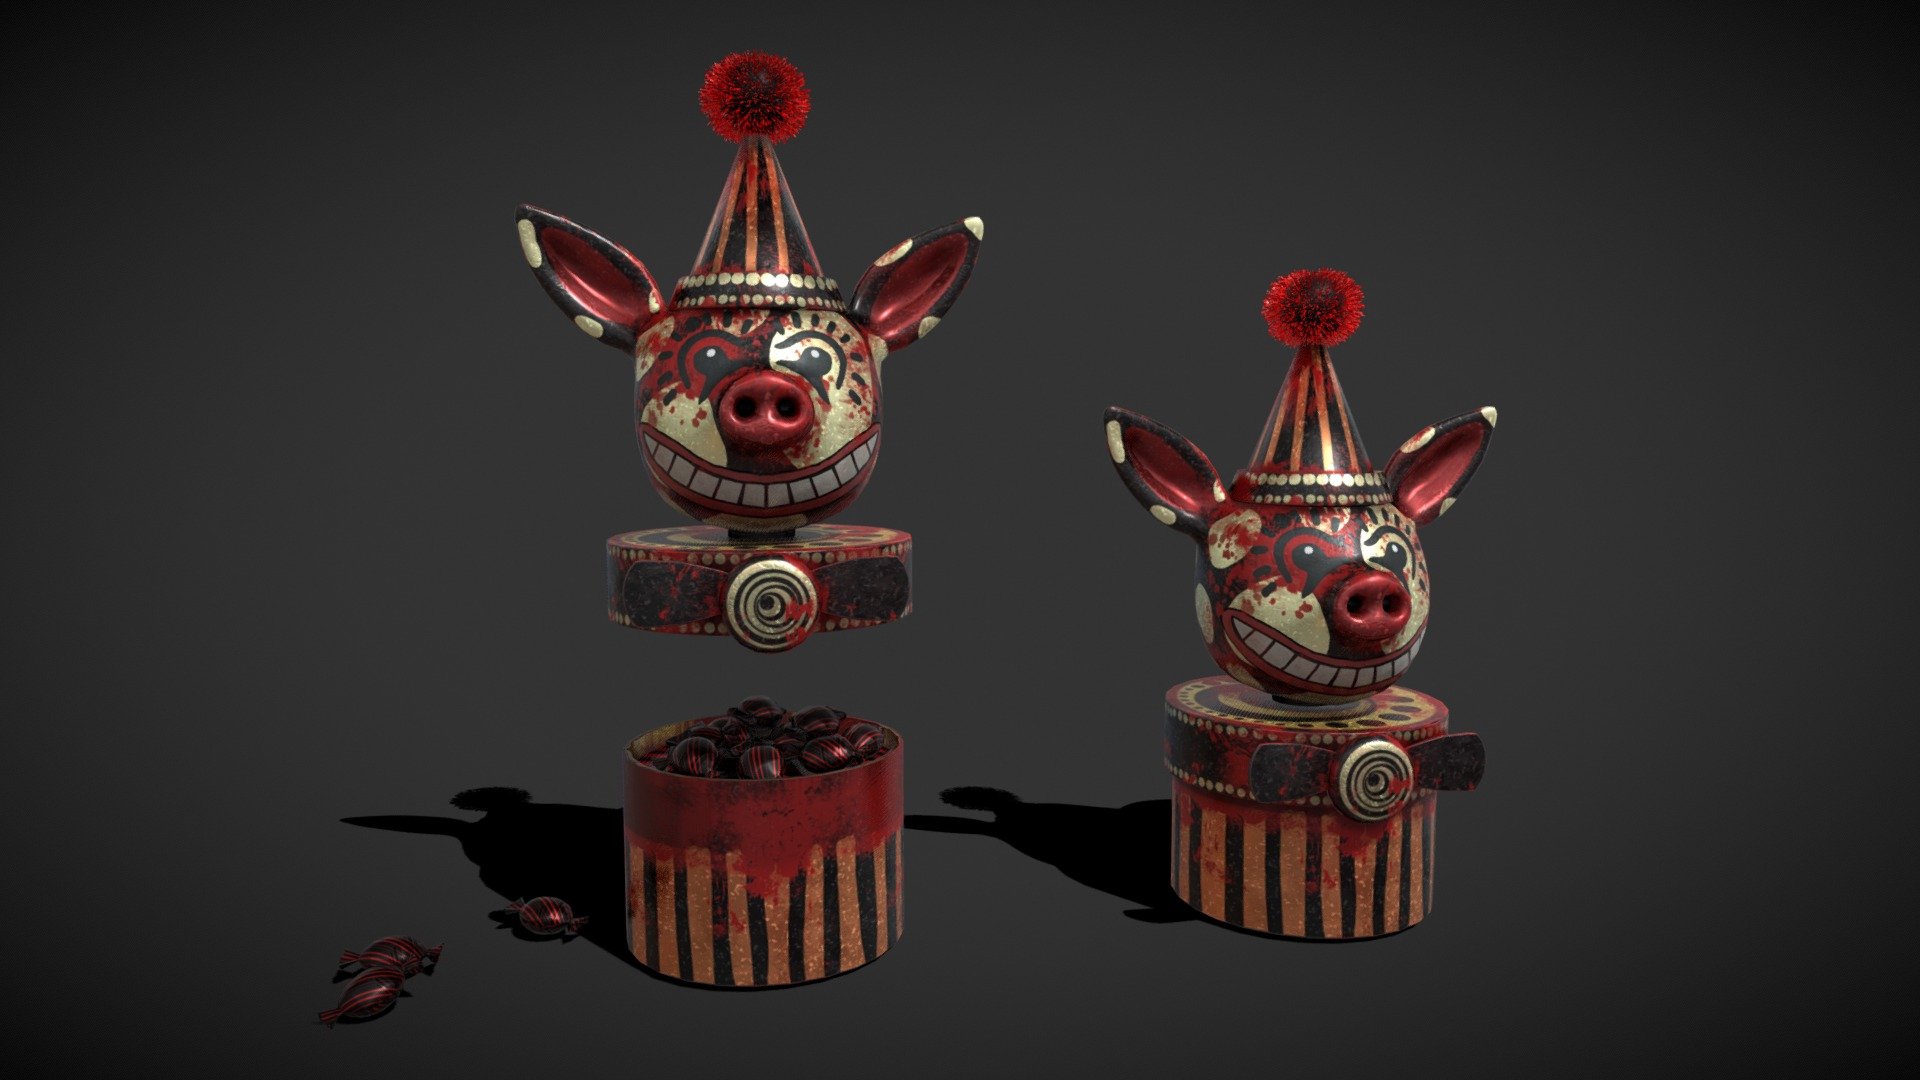 Pig_Head_Candy_Tin_FBX
VR / AR / Low-poly
PBR approved
Geometry Polygon mesh
Polygons 32,667
Vertices 64,416
Textures PNG 4K - Pig_Head_Candy_Tin - Buy Royalty Free 3D model by GetDeadEntertainment 3d model